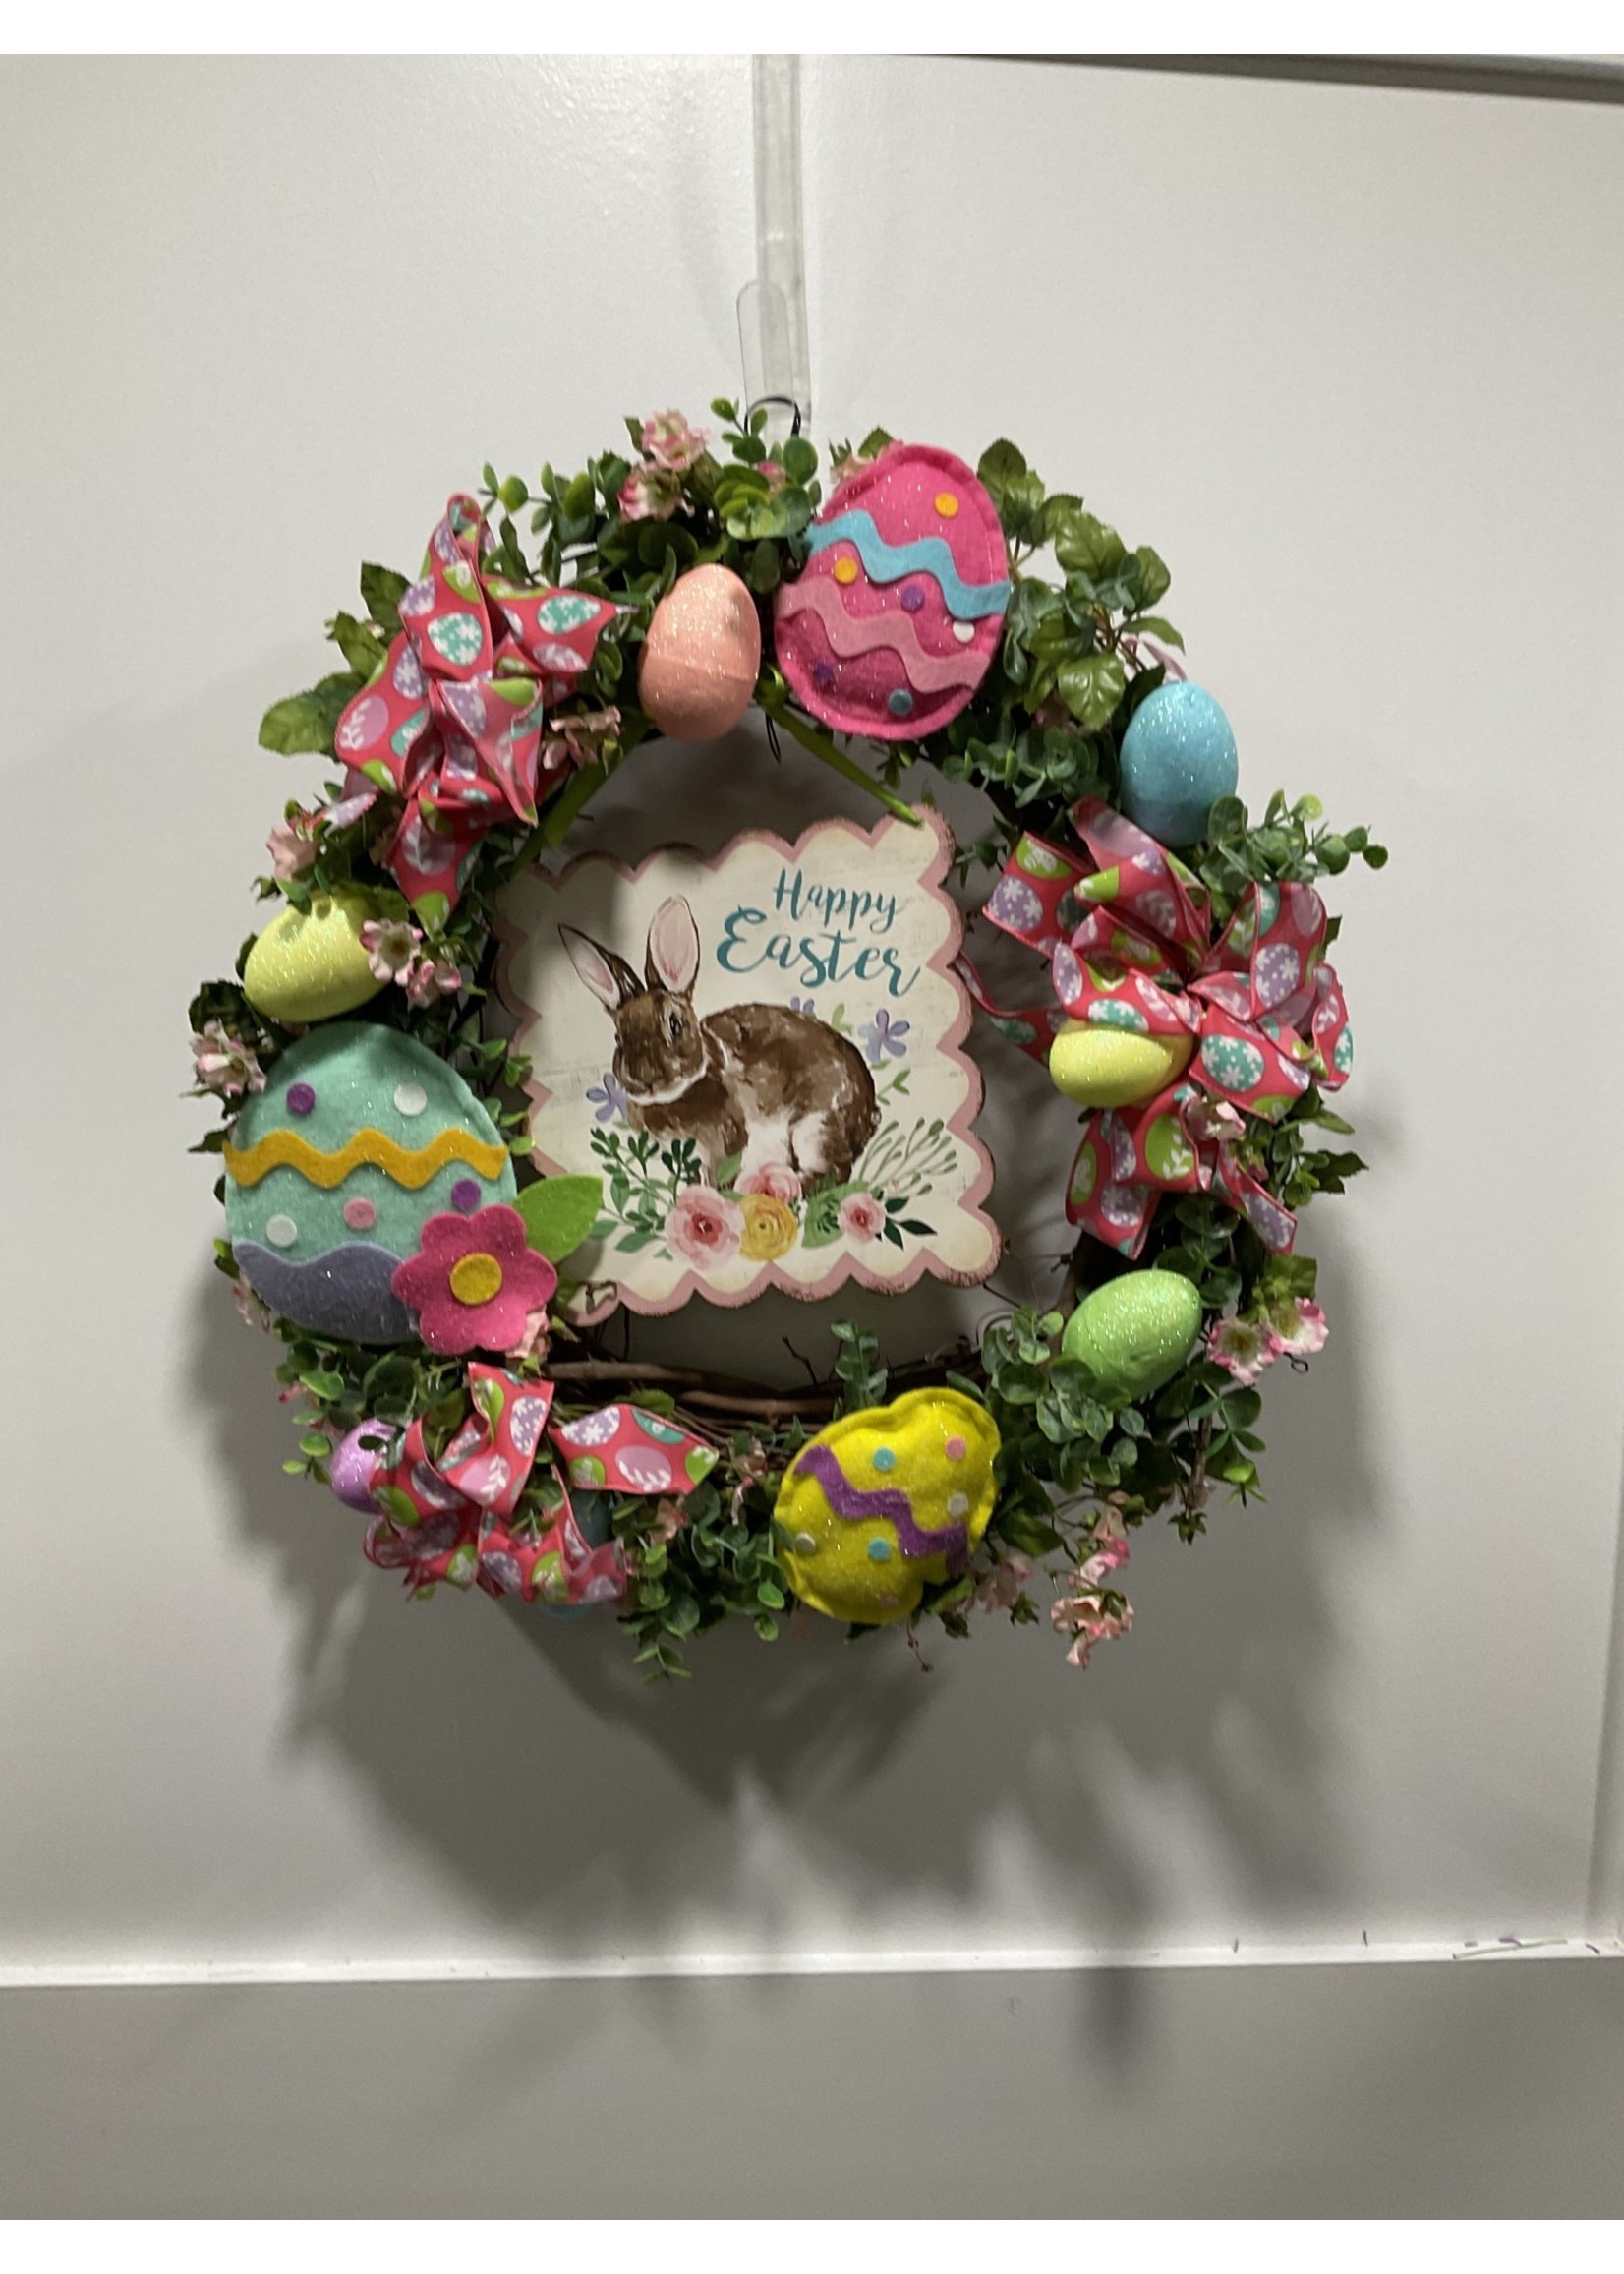 My New Favorite Thing 384 Wreath Grapevine 24 in-Bunny "Happy Easter" w/Easter Eggs and Pink Egg Ribbon